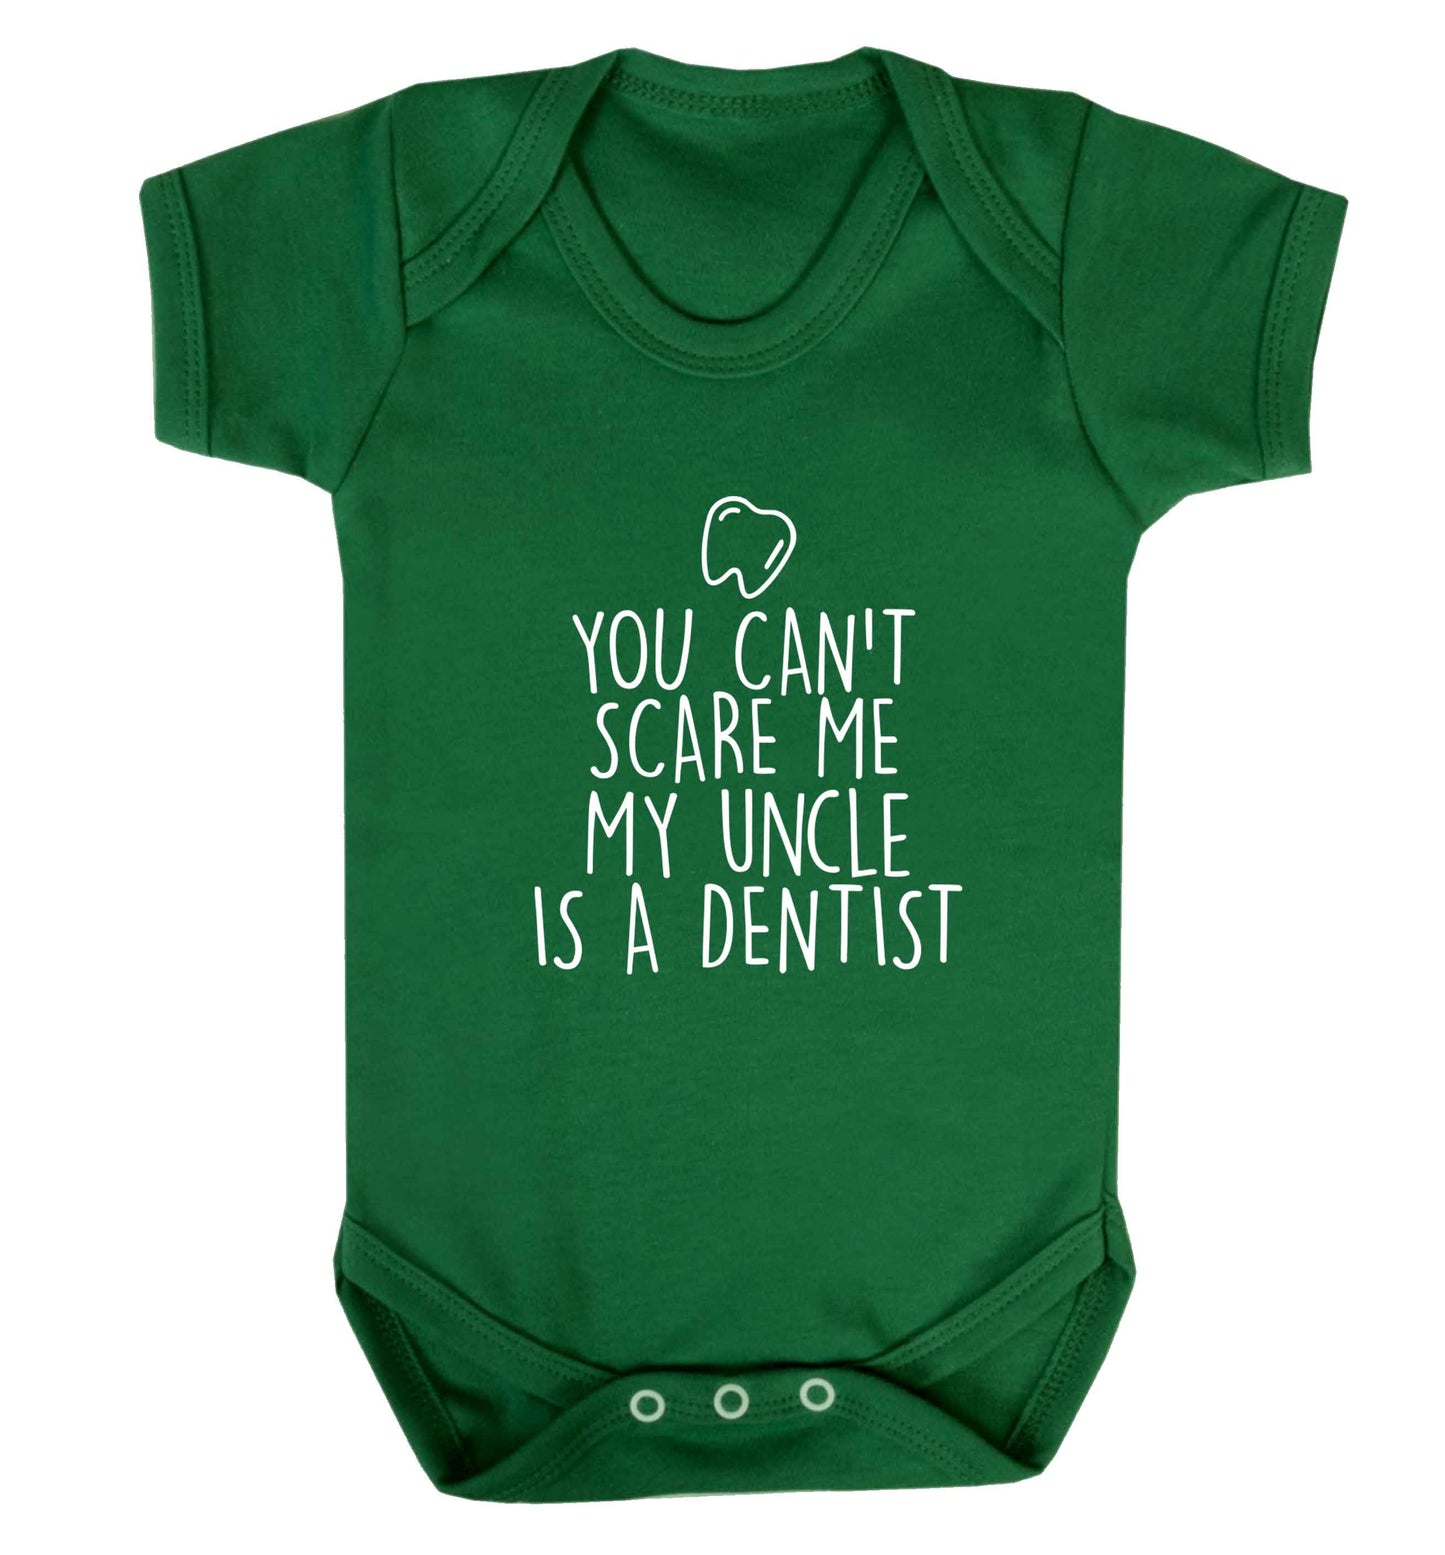 You can't scare me my uncle is a dentist baby vest green 18-24 months